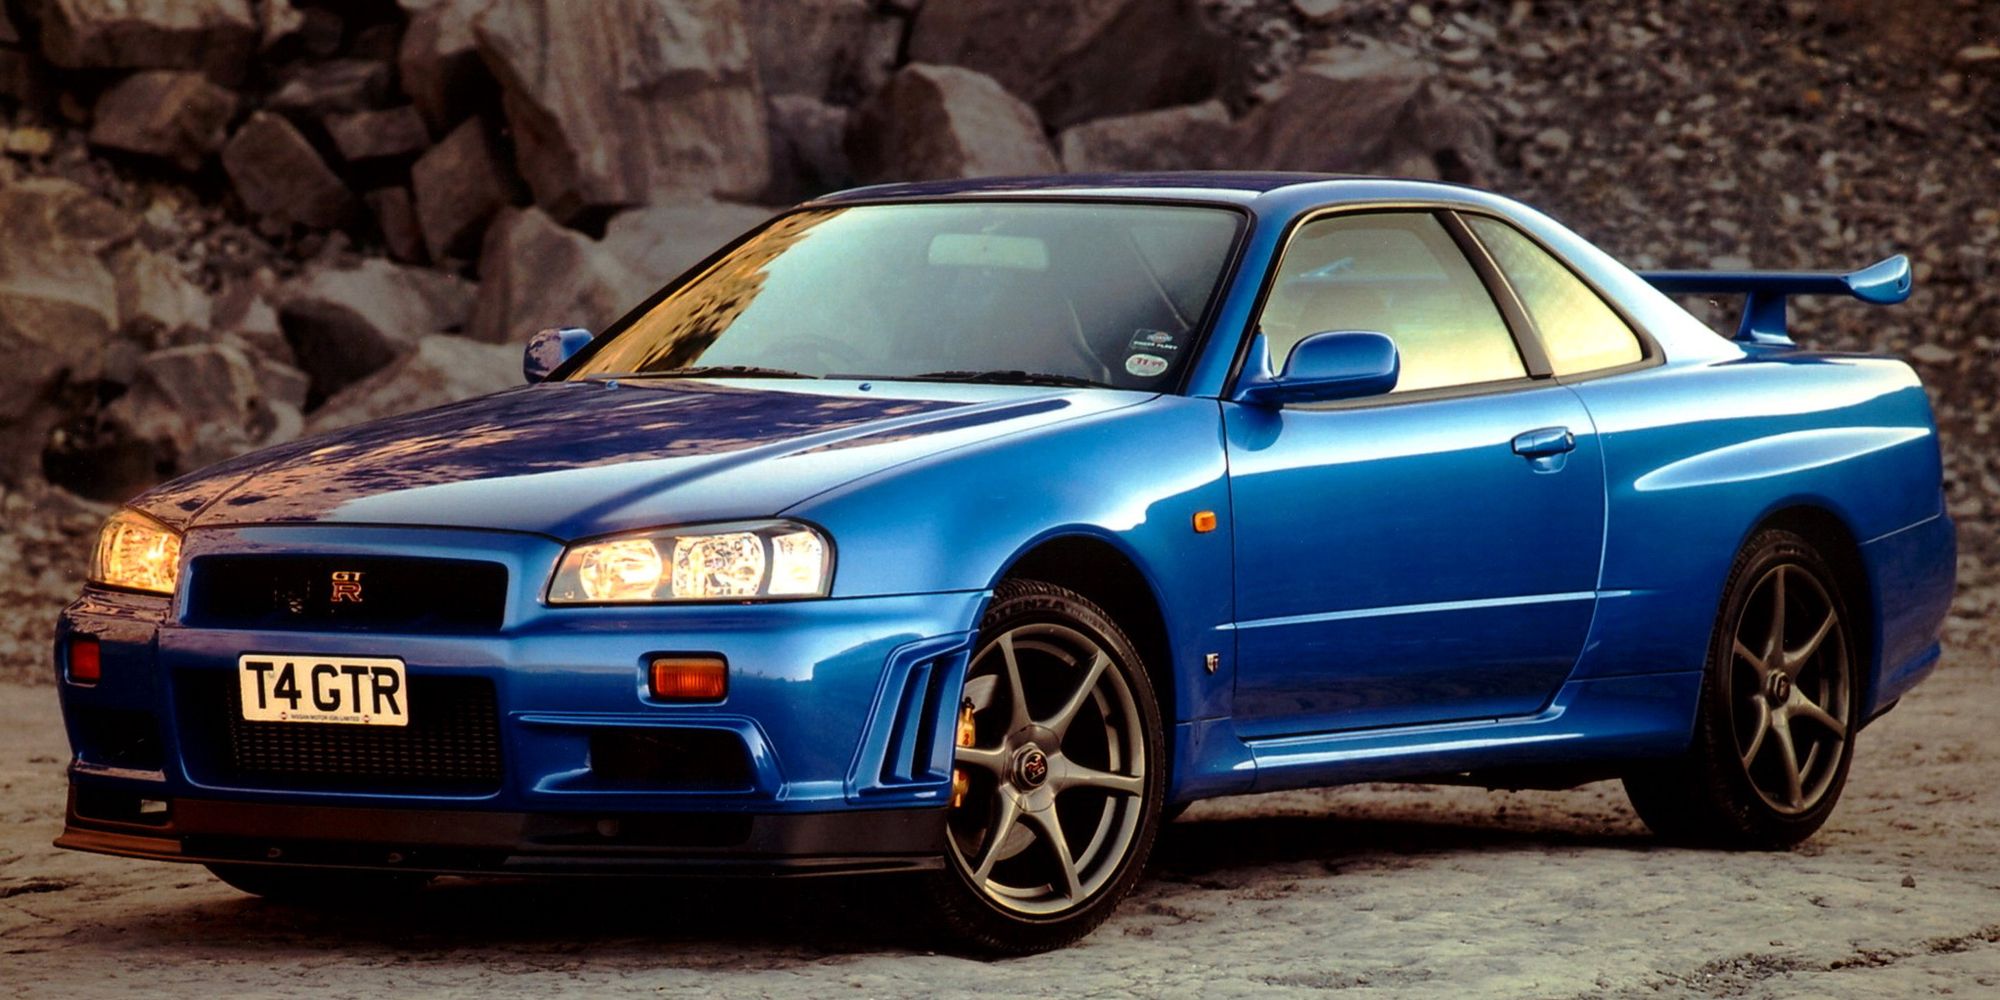 Front 3/4 view of the R34 Skyline GTR